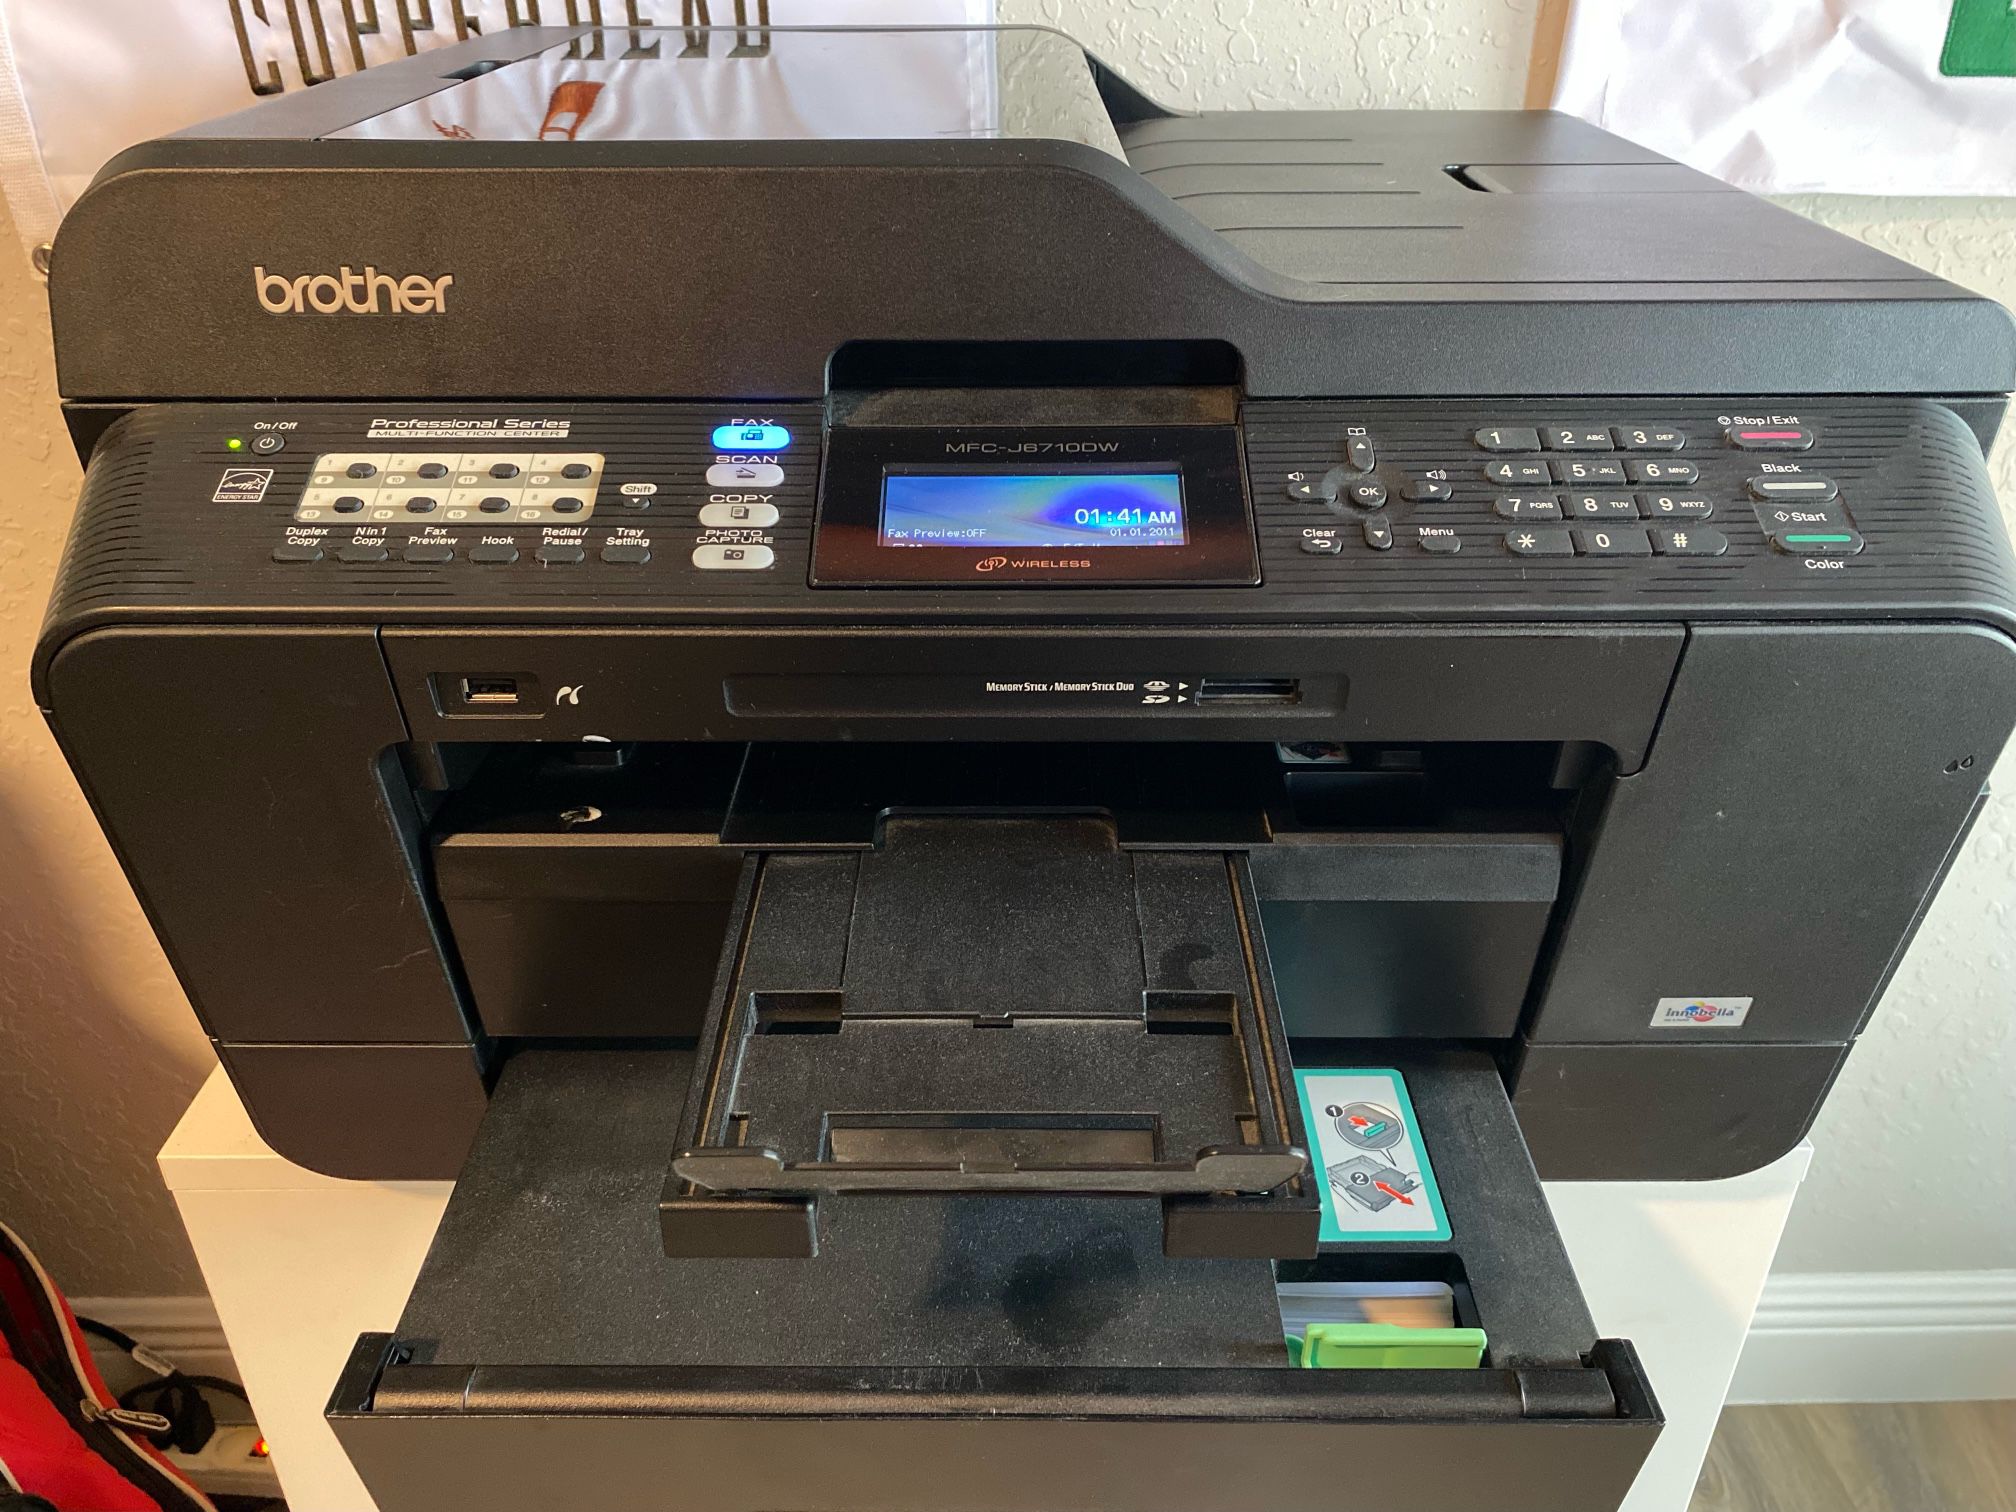 Brother MFC Color Printer-large and standard paper trays